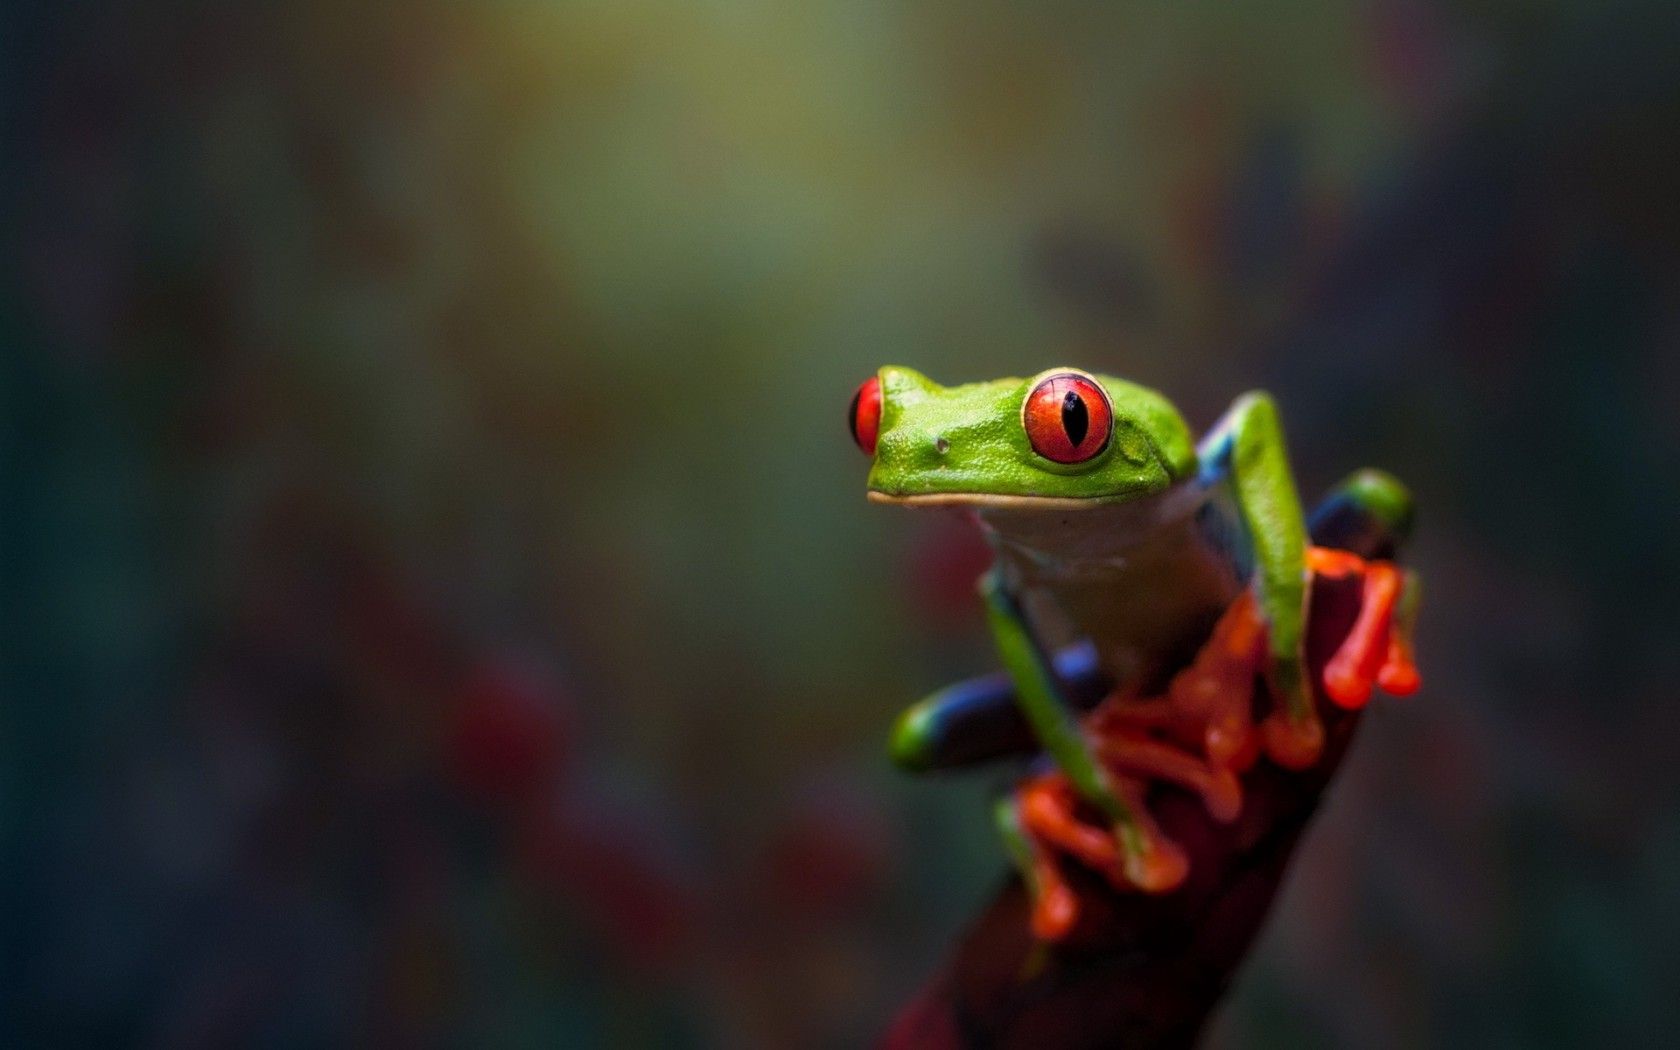 Red Eyed Tree Frog Wallpaper. Red Eyed Tree Frog Wallpaper, Red Eyed Frog From Costa Rica Wallpaper And Red Eyed Tree Frog Wallpaper 1920 X 1080